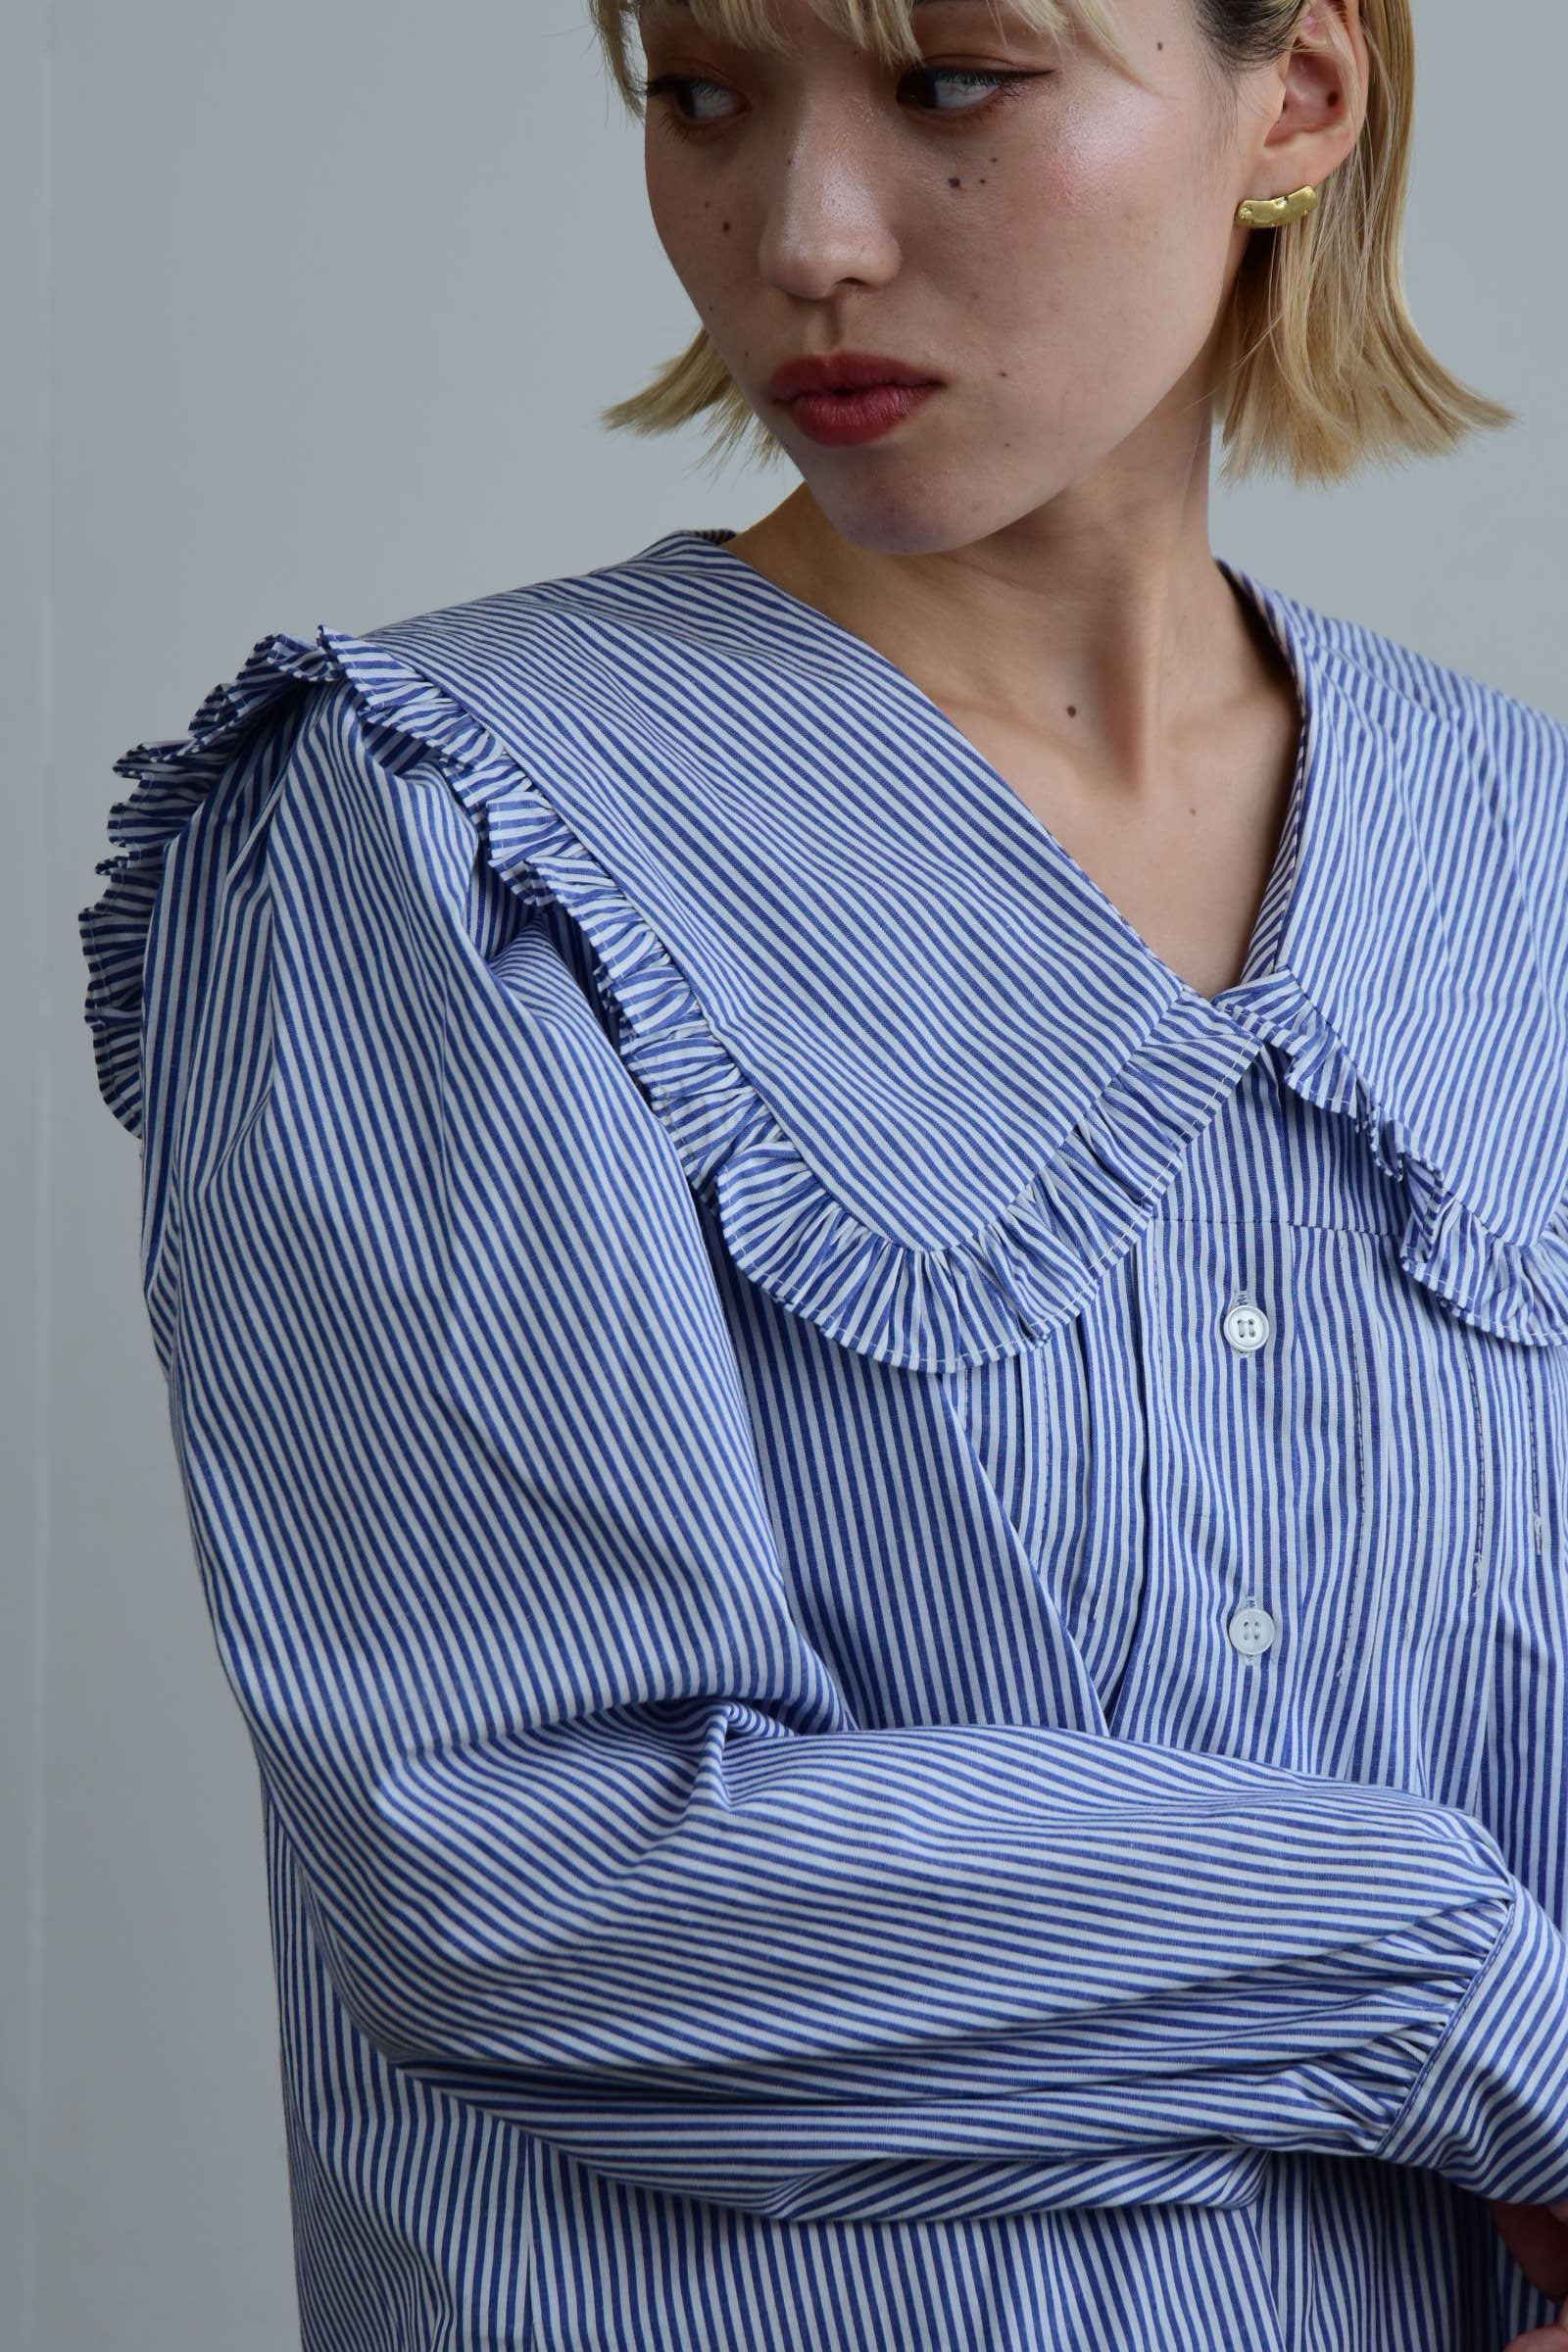 baybee pin tuck frill blouse (white)